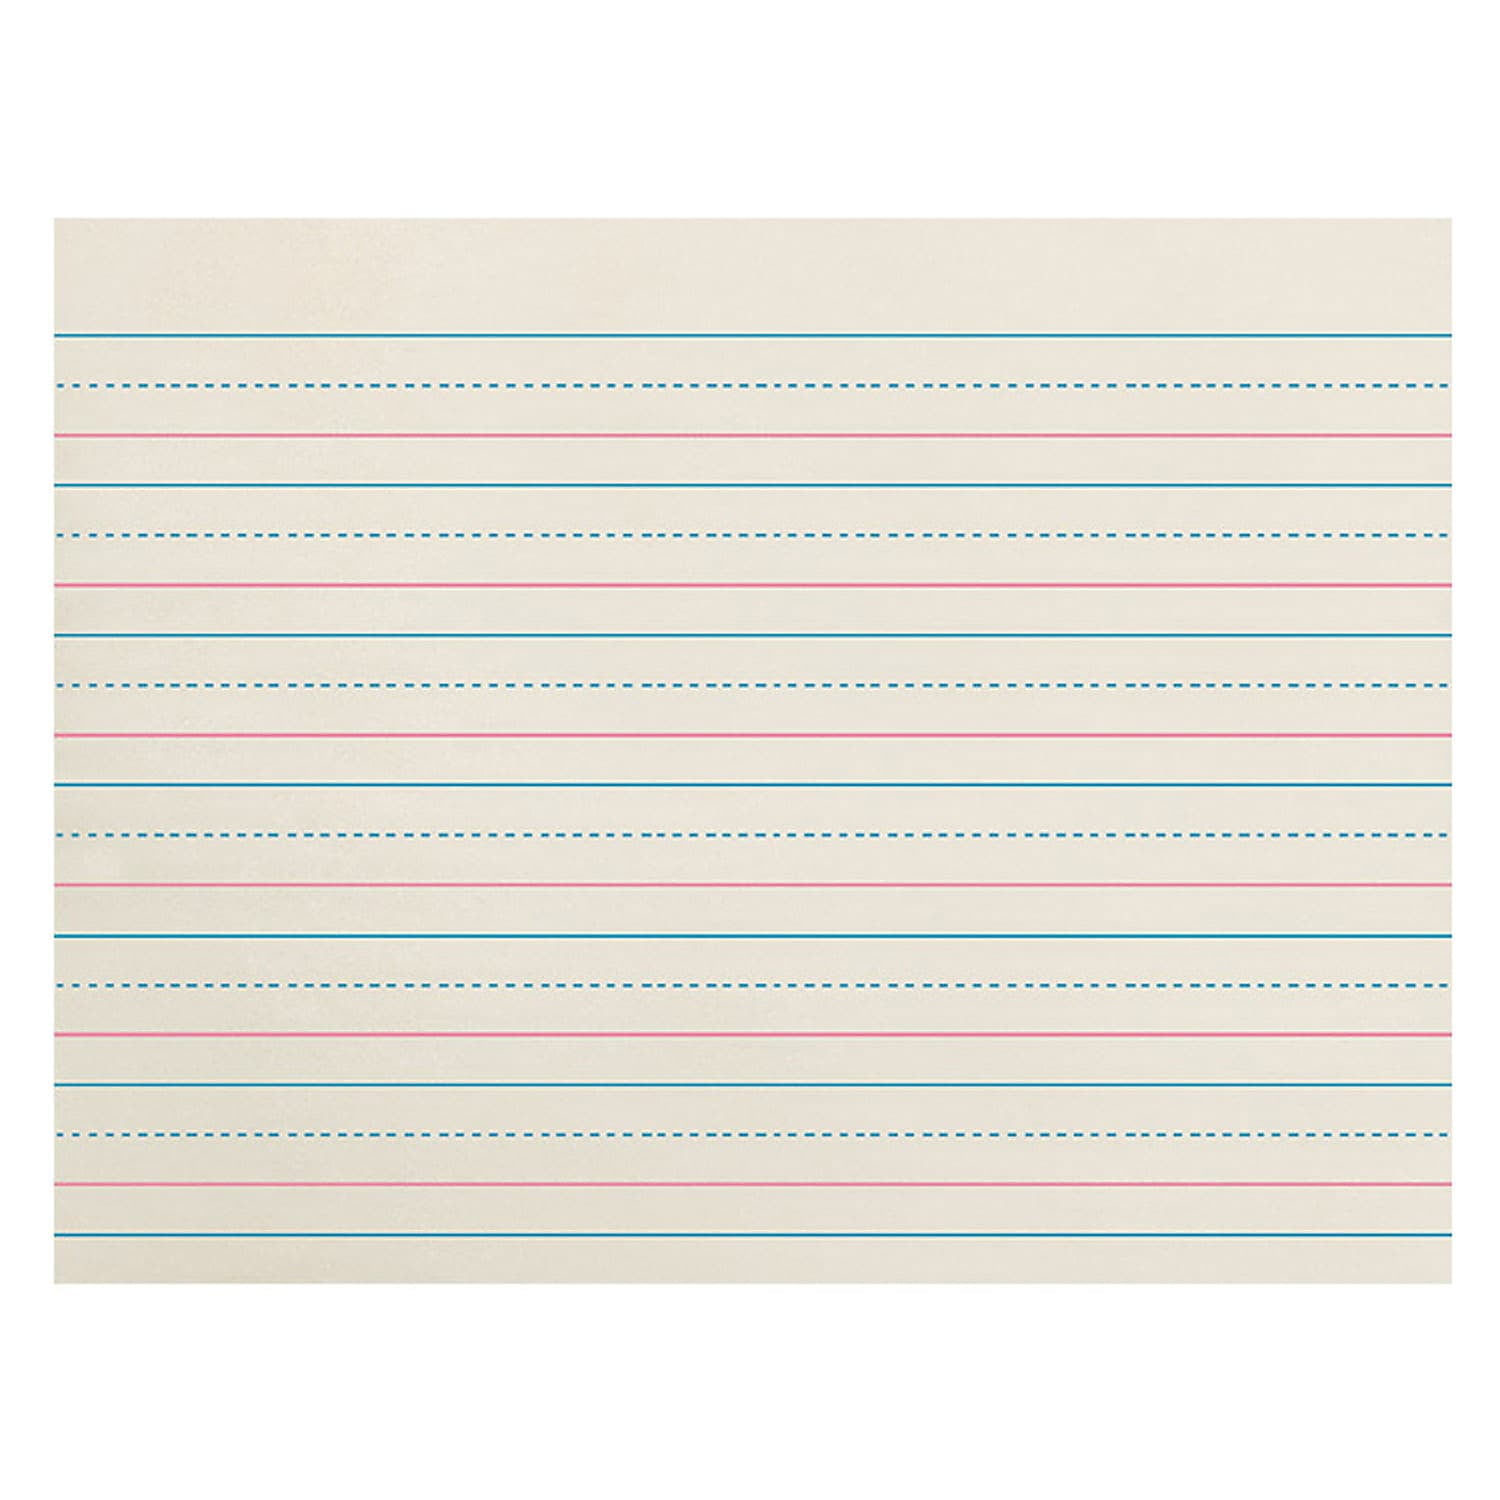 Handwriting Paper To Print – Madison's Paper Templates